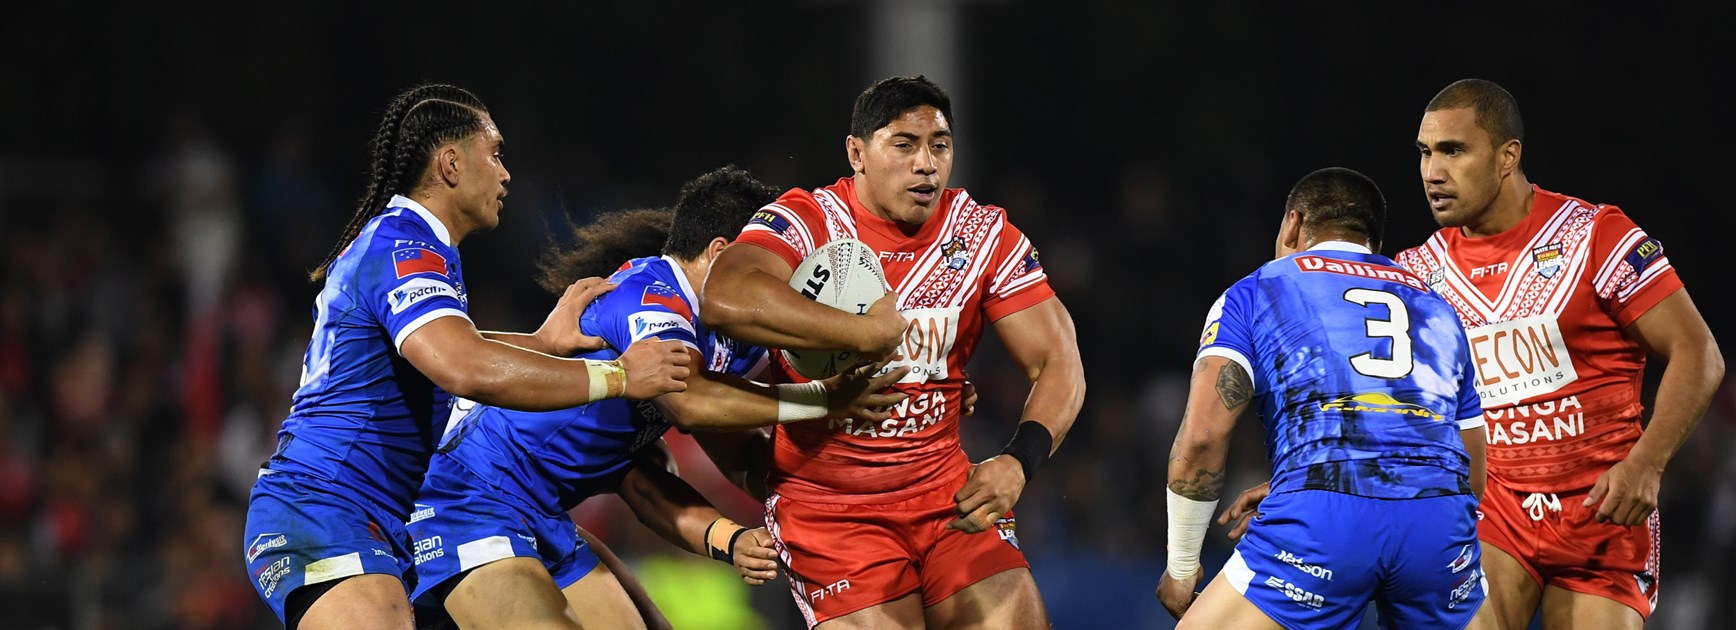 Woolf expects star power to return for Tonga